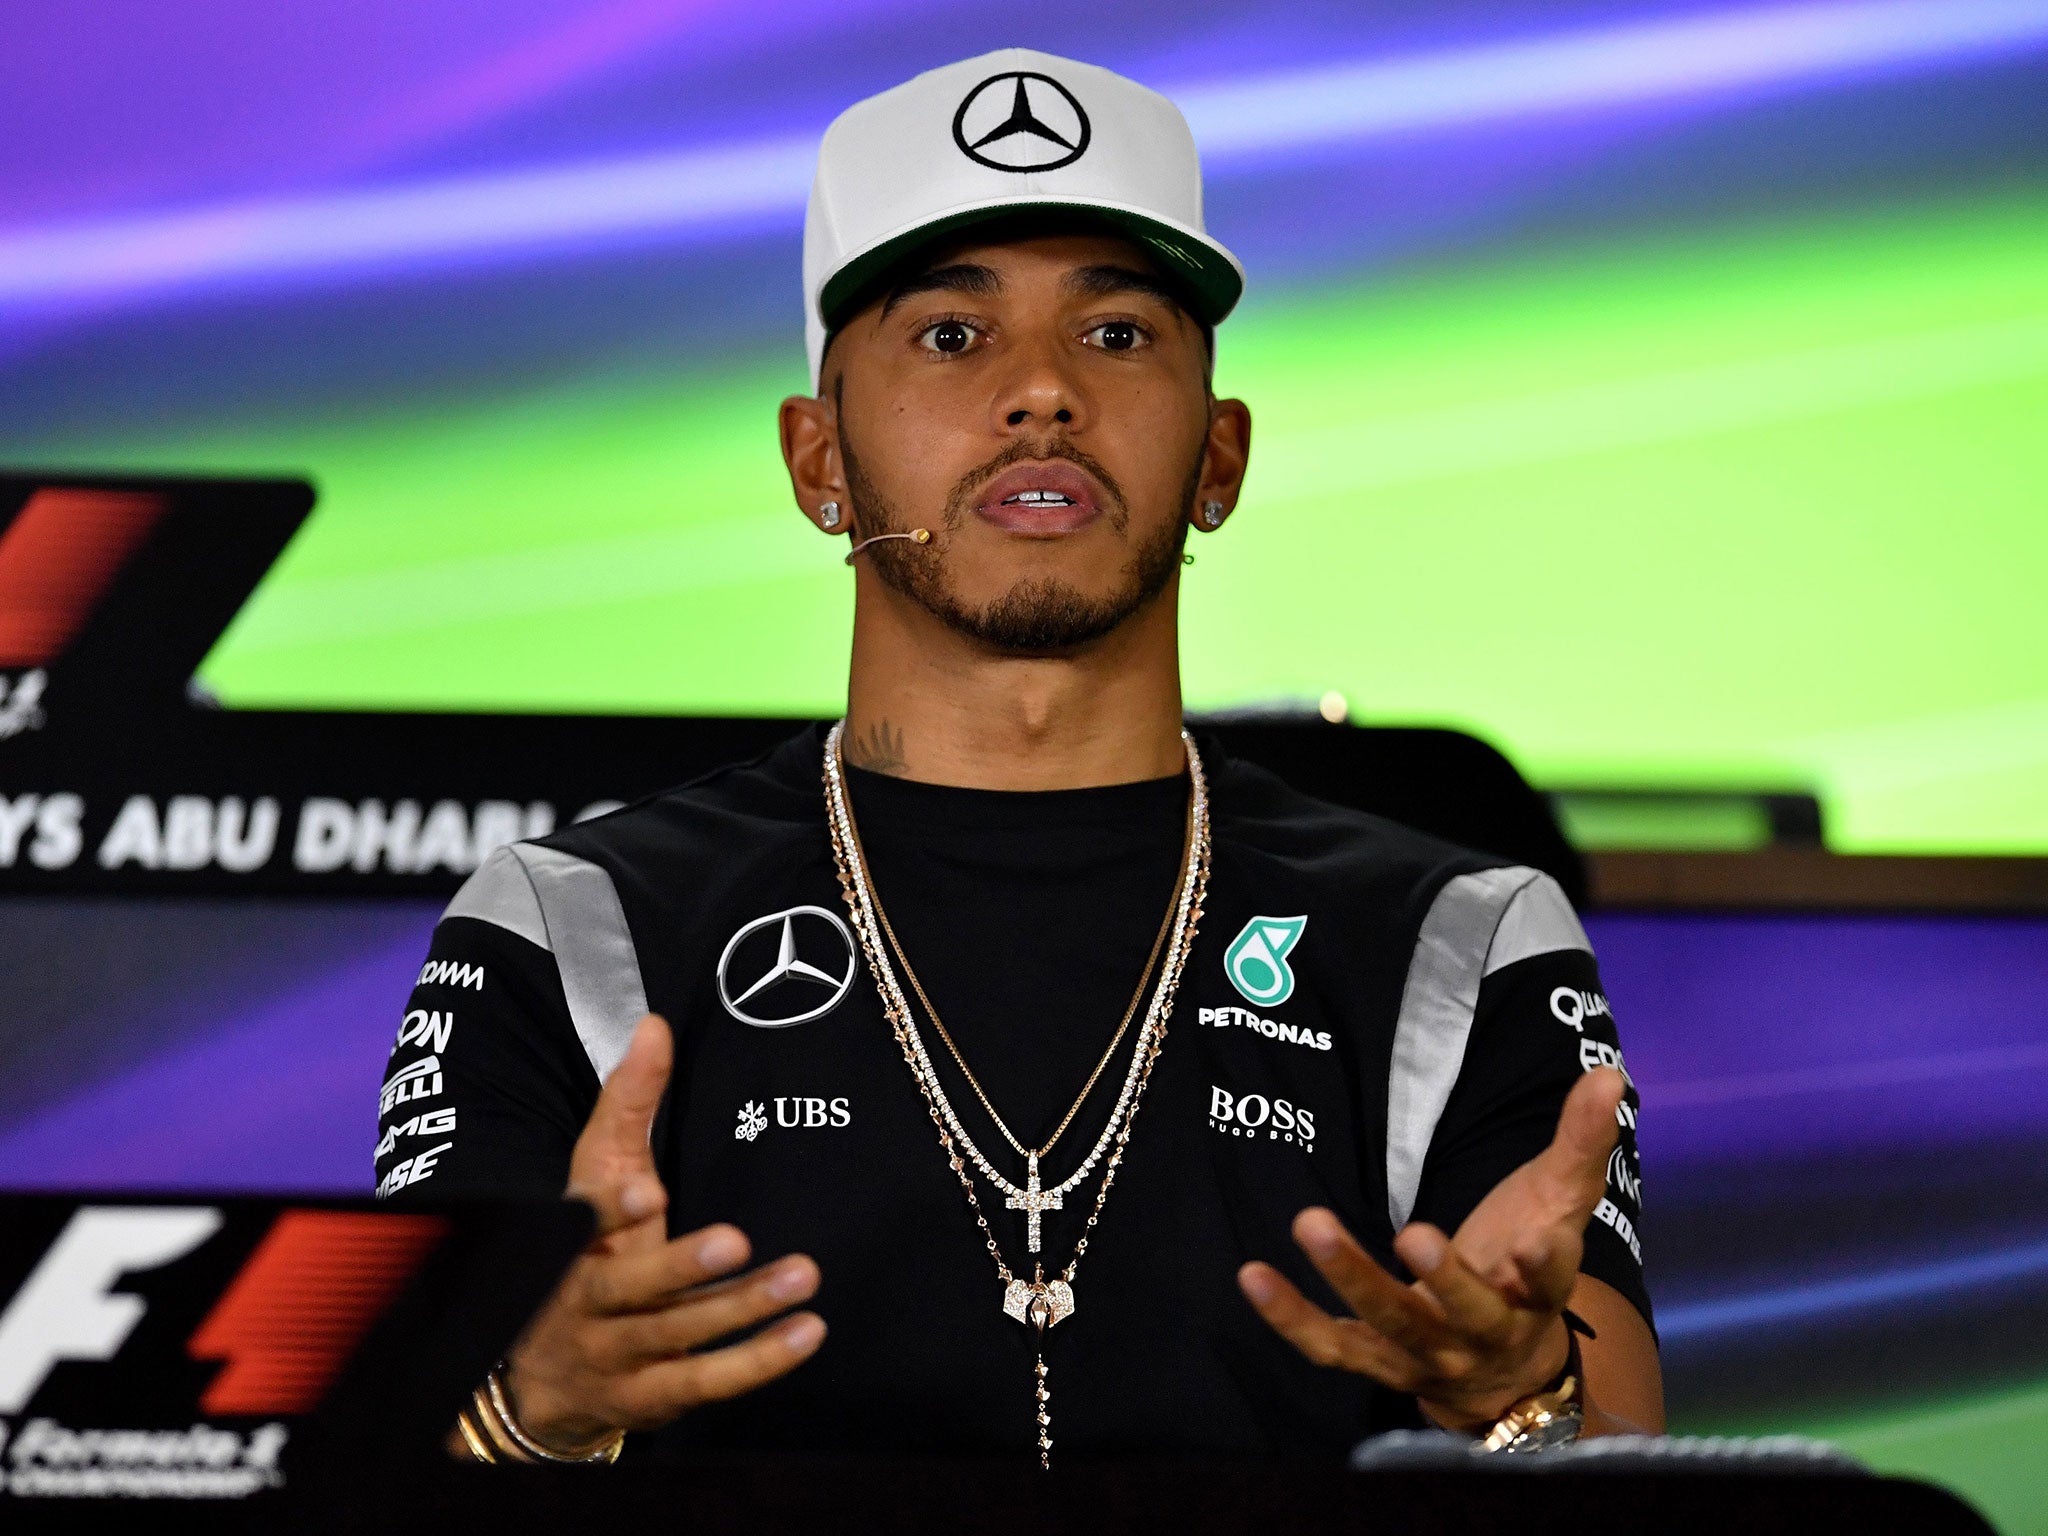 Lewis Hamilton hopes to draw inspiration from the late Aki Hintsa in his quest to win a fourth world title